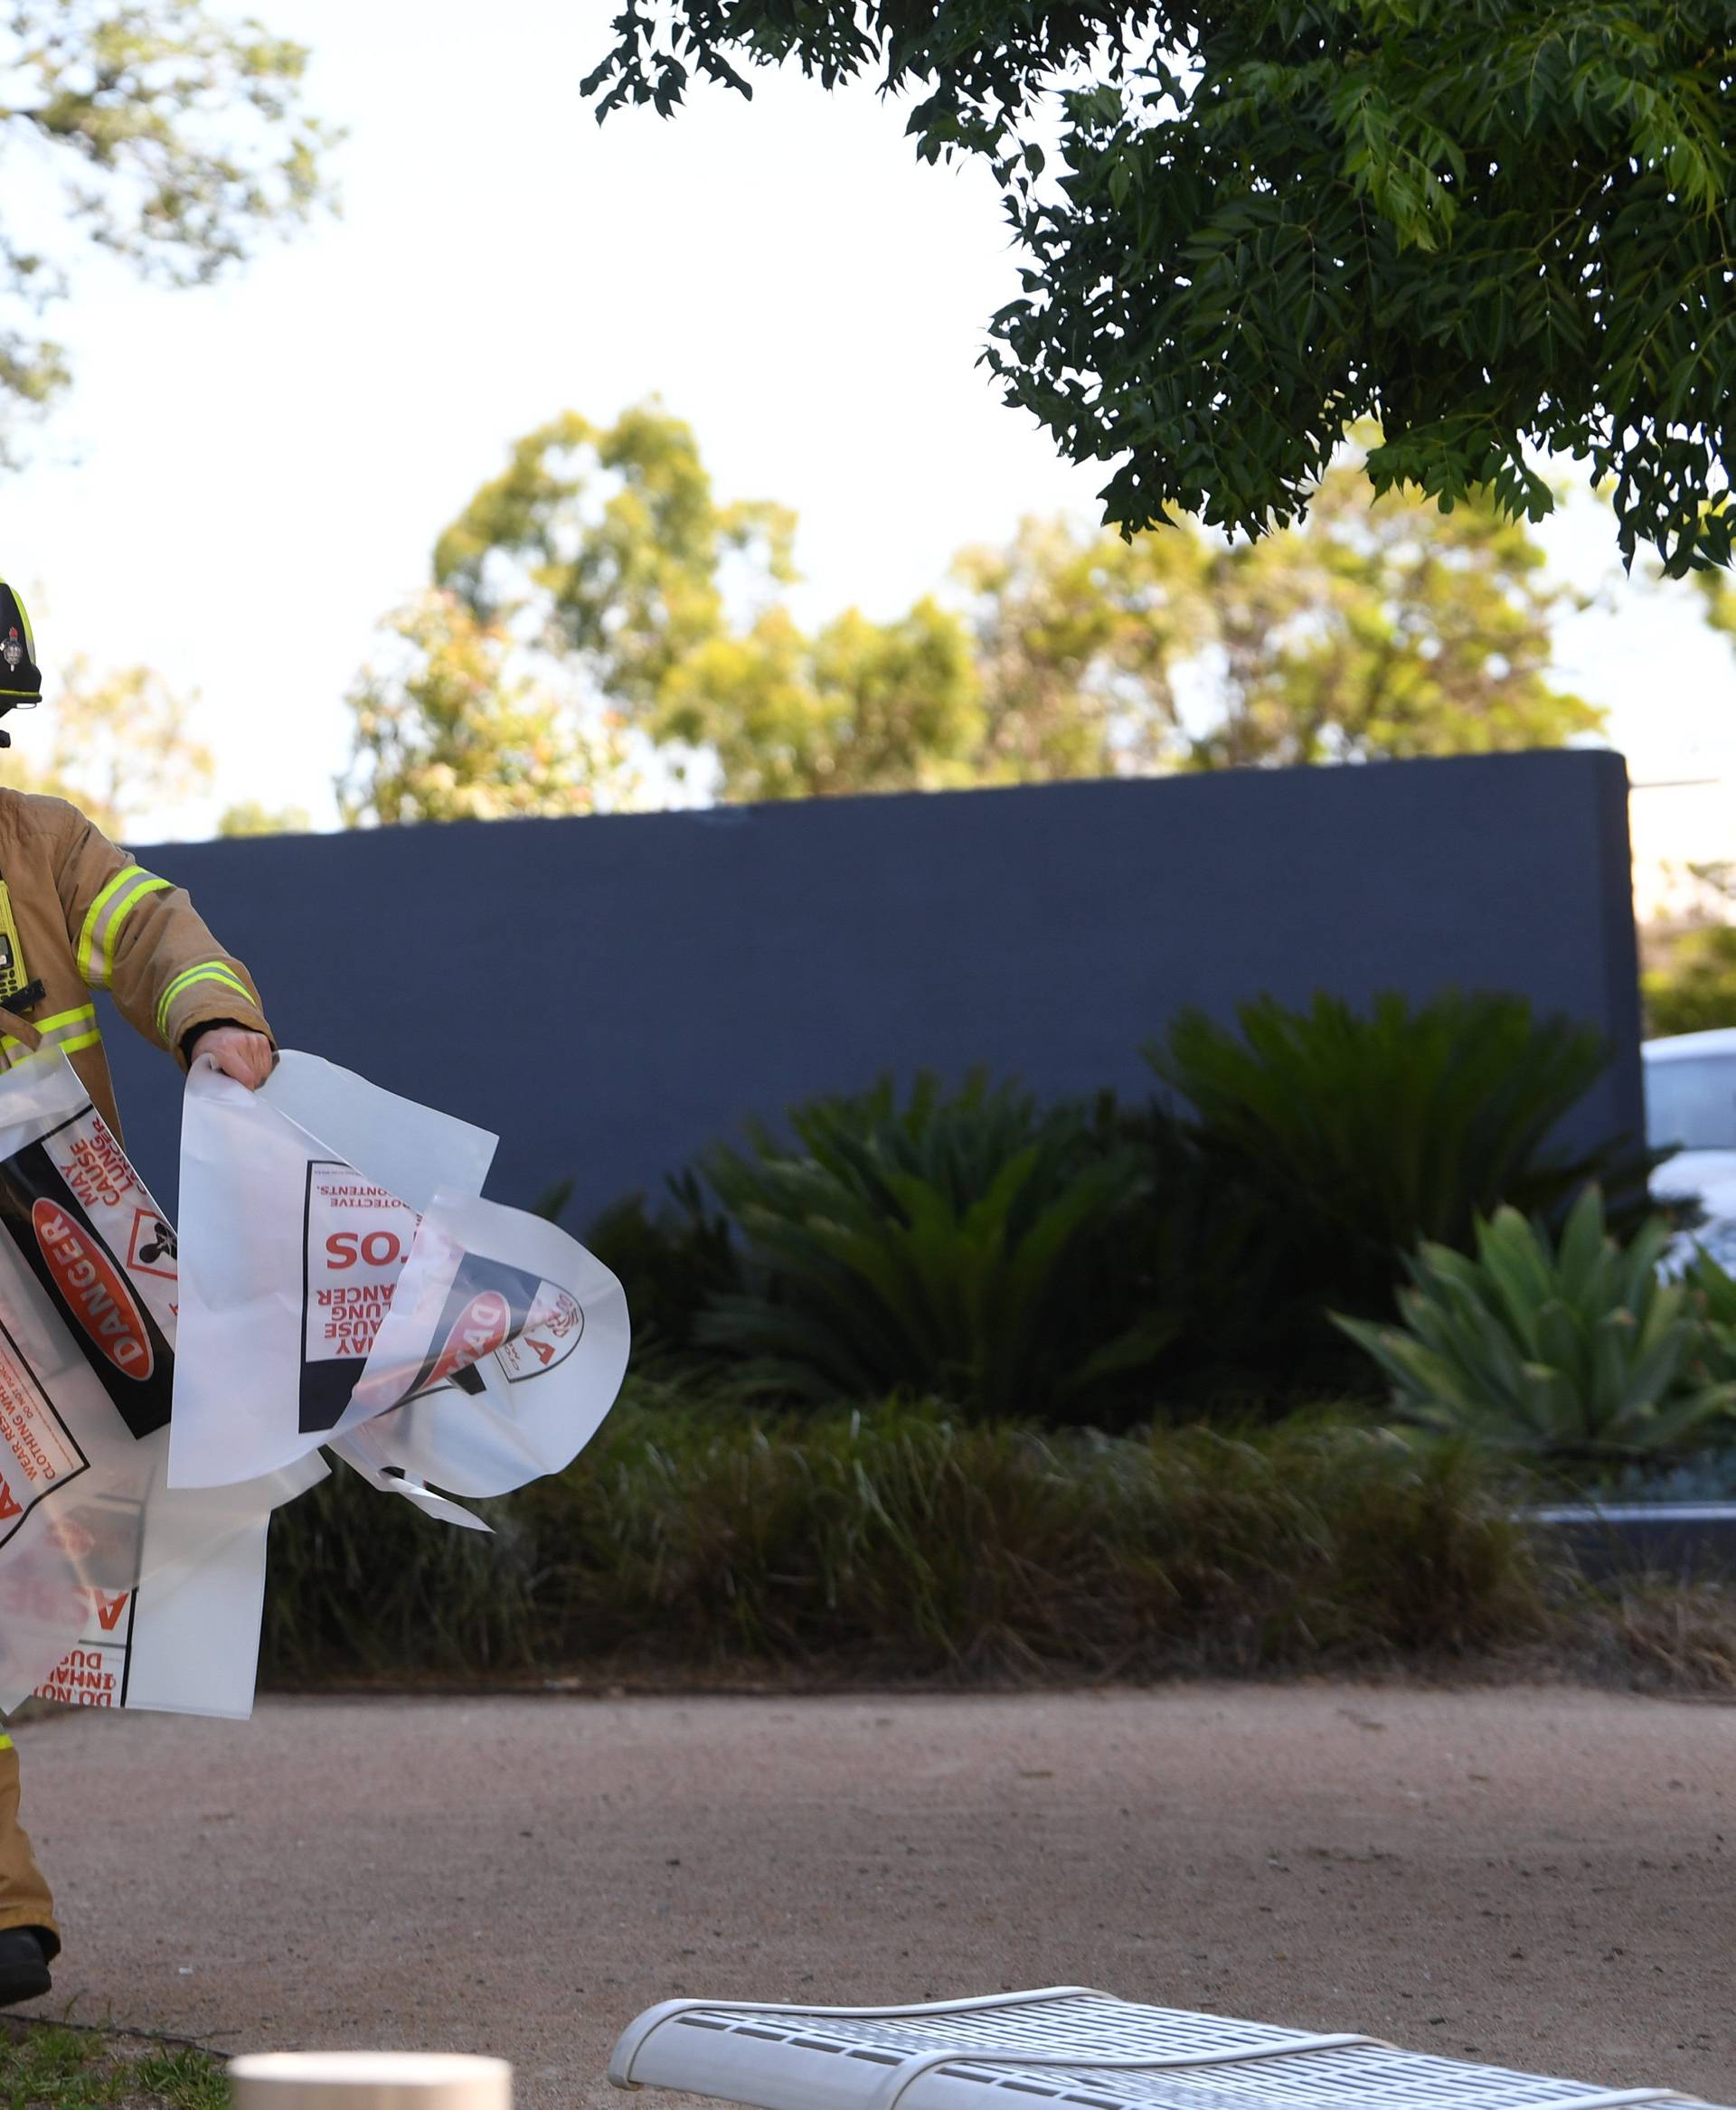 A fire fighter is seen carrying hazardous material bags into the South Korean consulate in Melbourne